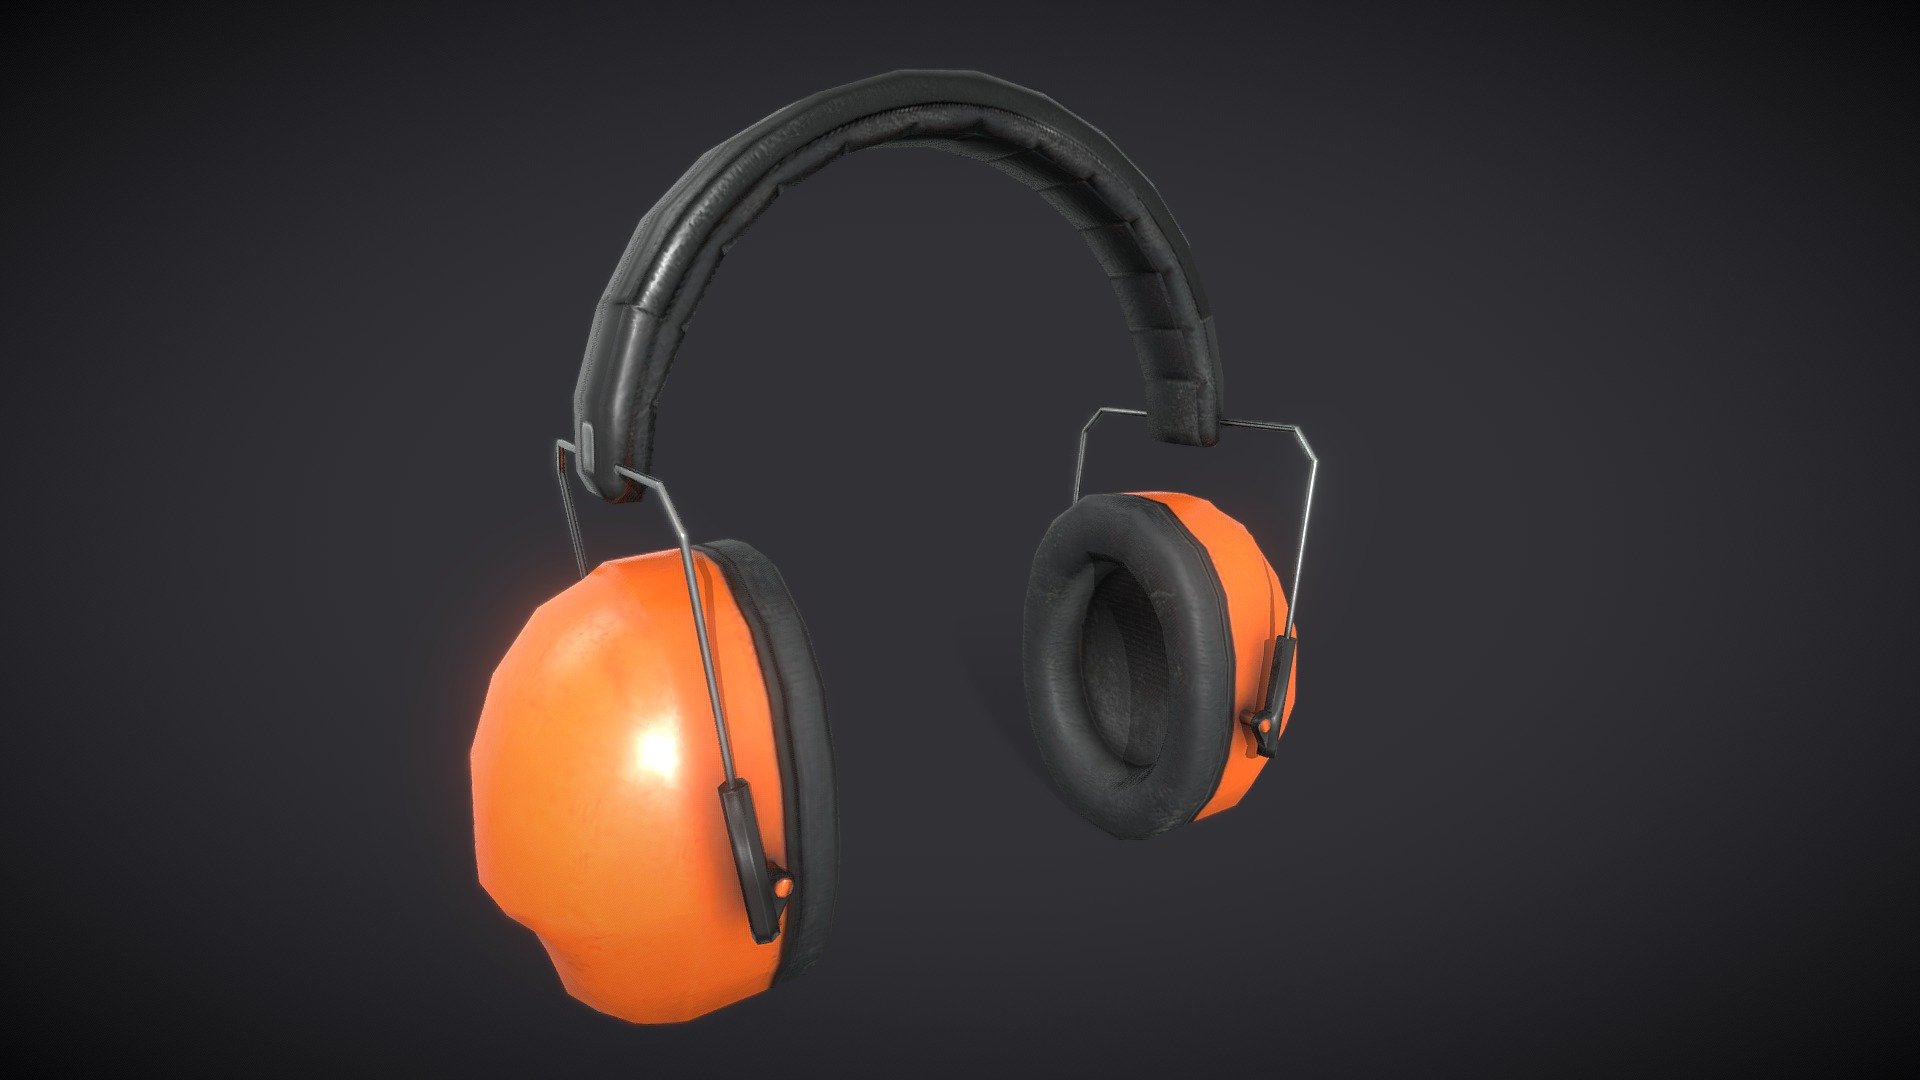 Noise Canceling Headphones



Dimensions : 0.355m x 0.148m x 0.319m

Texture : PBR, 1024

Files Include : Textures, GLB &amp; FBX

Usage : VR, Game ready

.............

OVA’s flagship software, StellarX, allows those with no programming or coding knowledge to place 3D goods and create immersive experiences through simple drag-and-drop actions. 

Storytelling, which involves a series of interactions, sequences, and triggers are easily created through OVA’s patent-pending visual scripting tool. 

.............

**Download StellarX on the Meta Quest Store: oculus.com/experiences/quest/8132958546745663
**

**Download StellarX on Steam: store.steampowered.com/app/1214640/StellarX
**

Have a bigger immersive project in mind? Get in touch with us! 



StellarX on LinkedIn: linkedin.com/showcase/stellarx-by-ova

Join the StellarX Discord server! 

.............

StellarX© 2022 - Underground Mine | Noise Canceling Headphones - Buy Royalty Free 3D model by StellarX 3d model